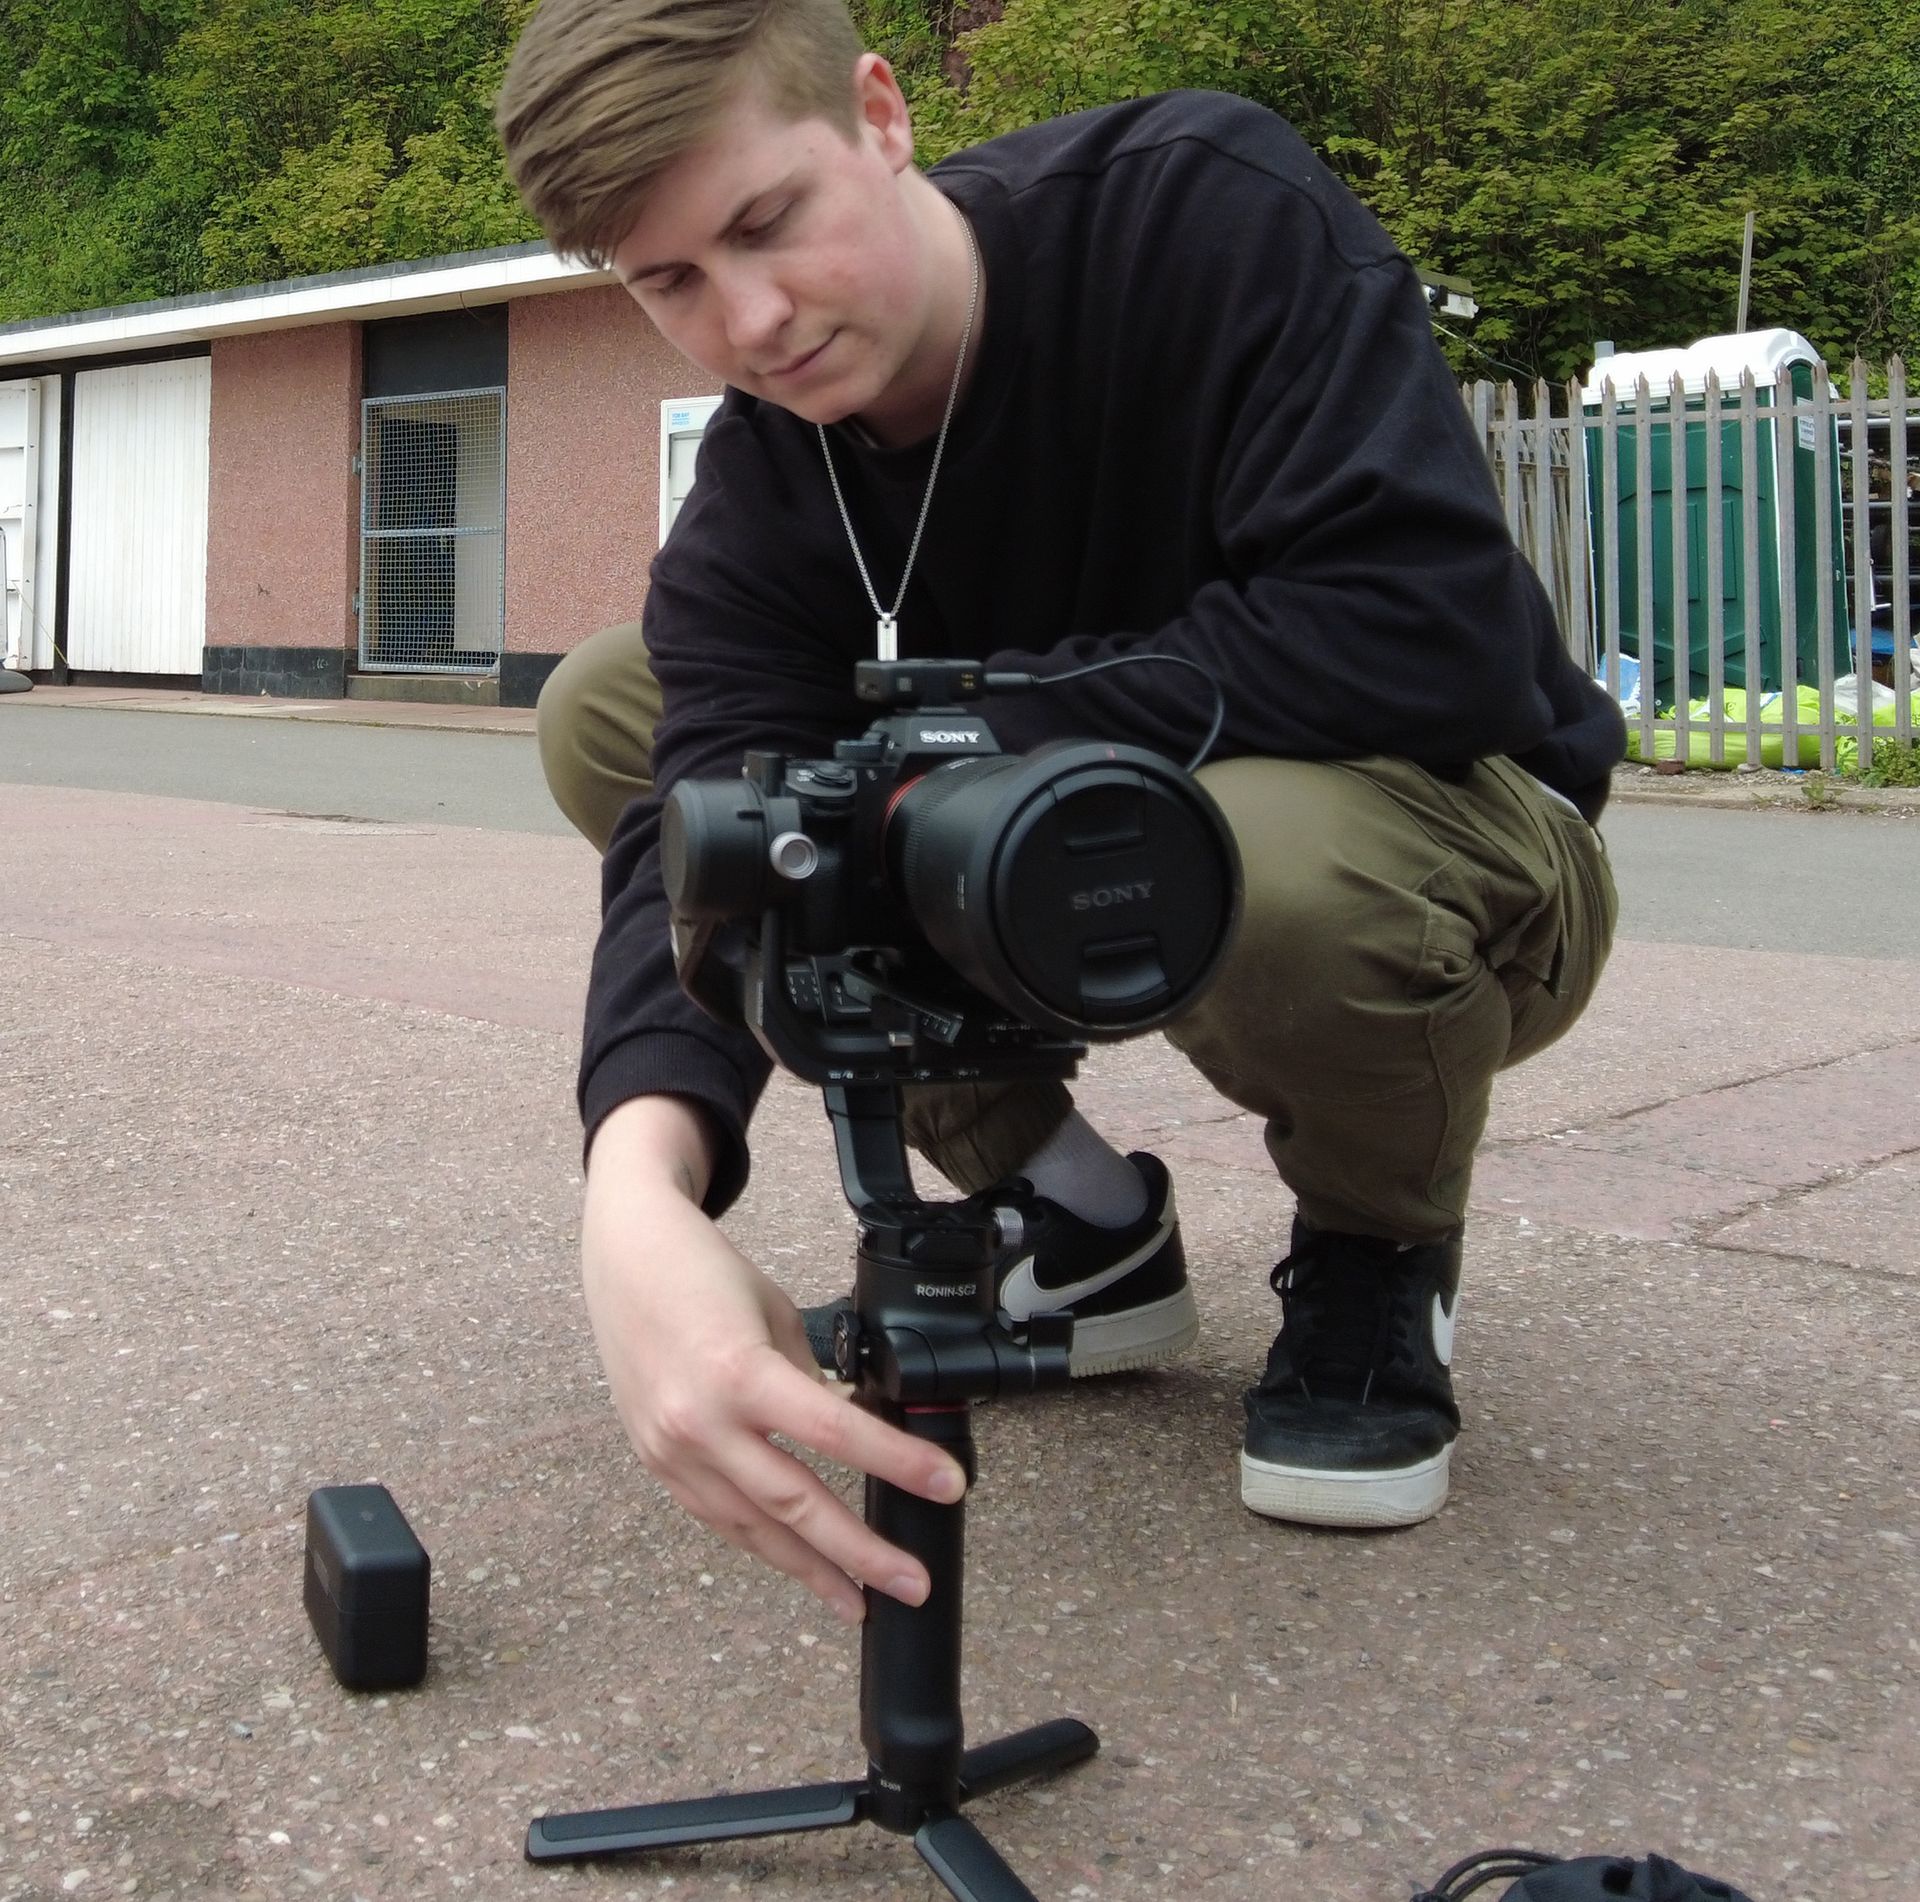 A man kneeling down with a sony camera on a tripod filming content for a business